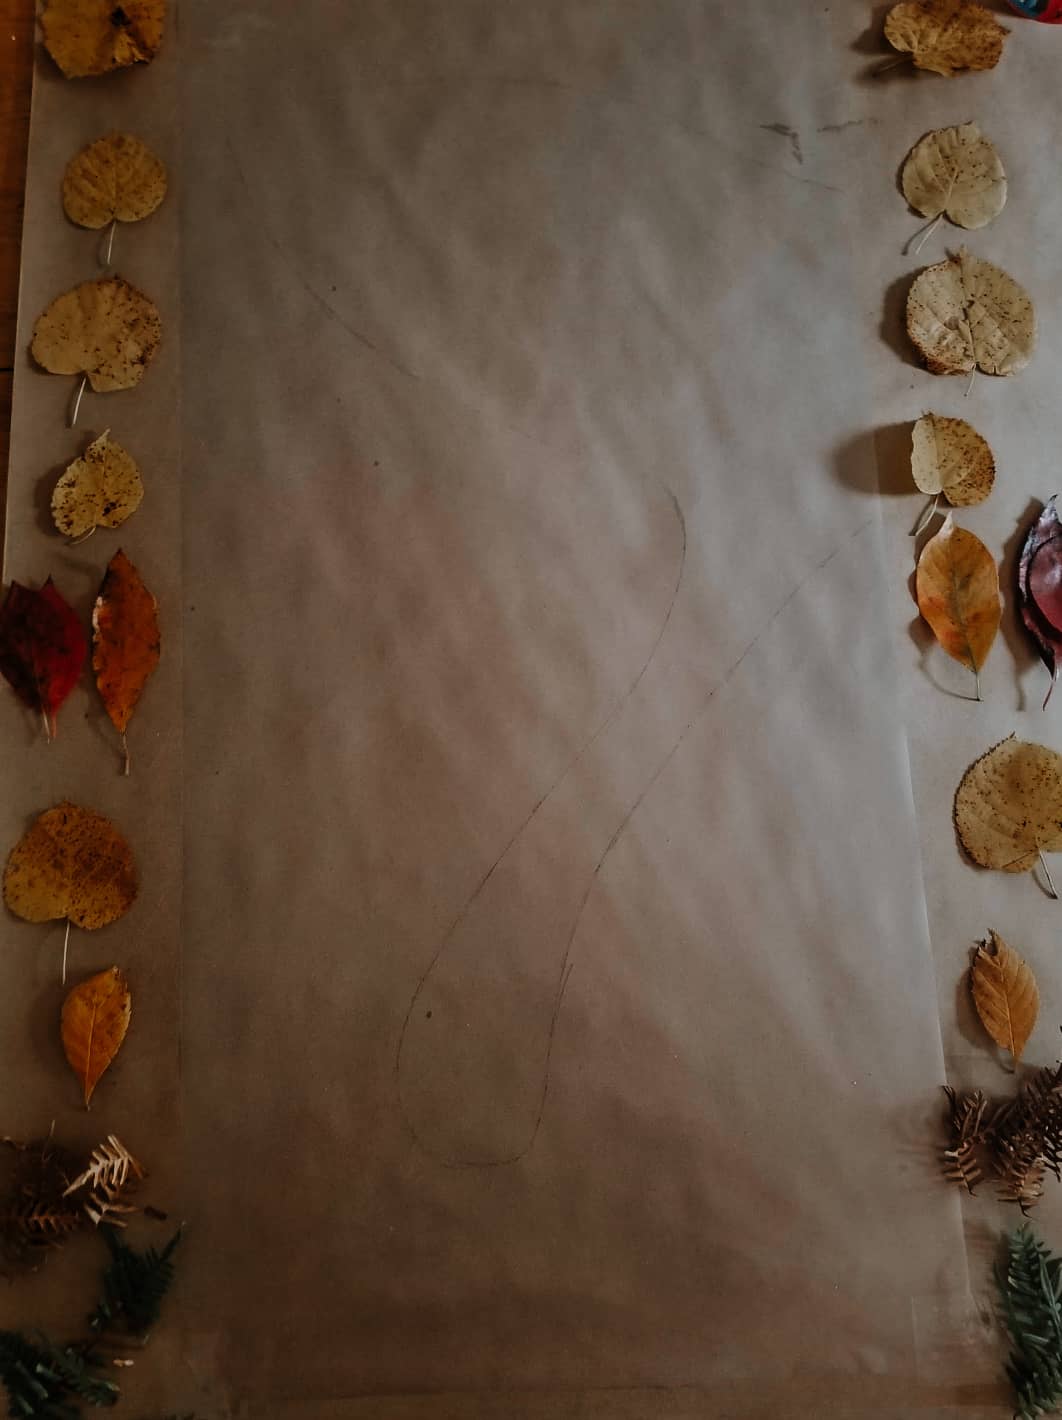 creating moth wings with leaves